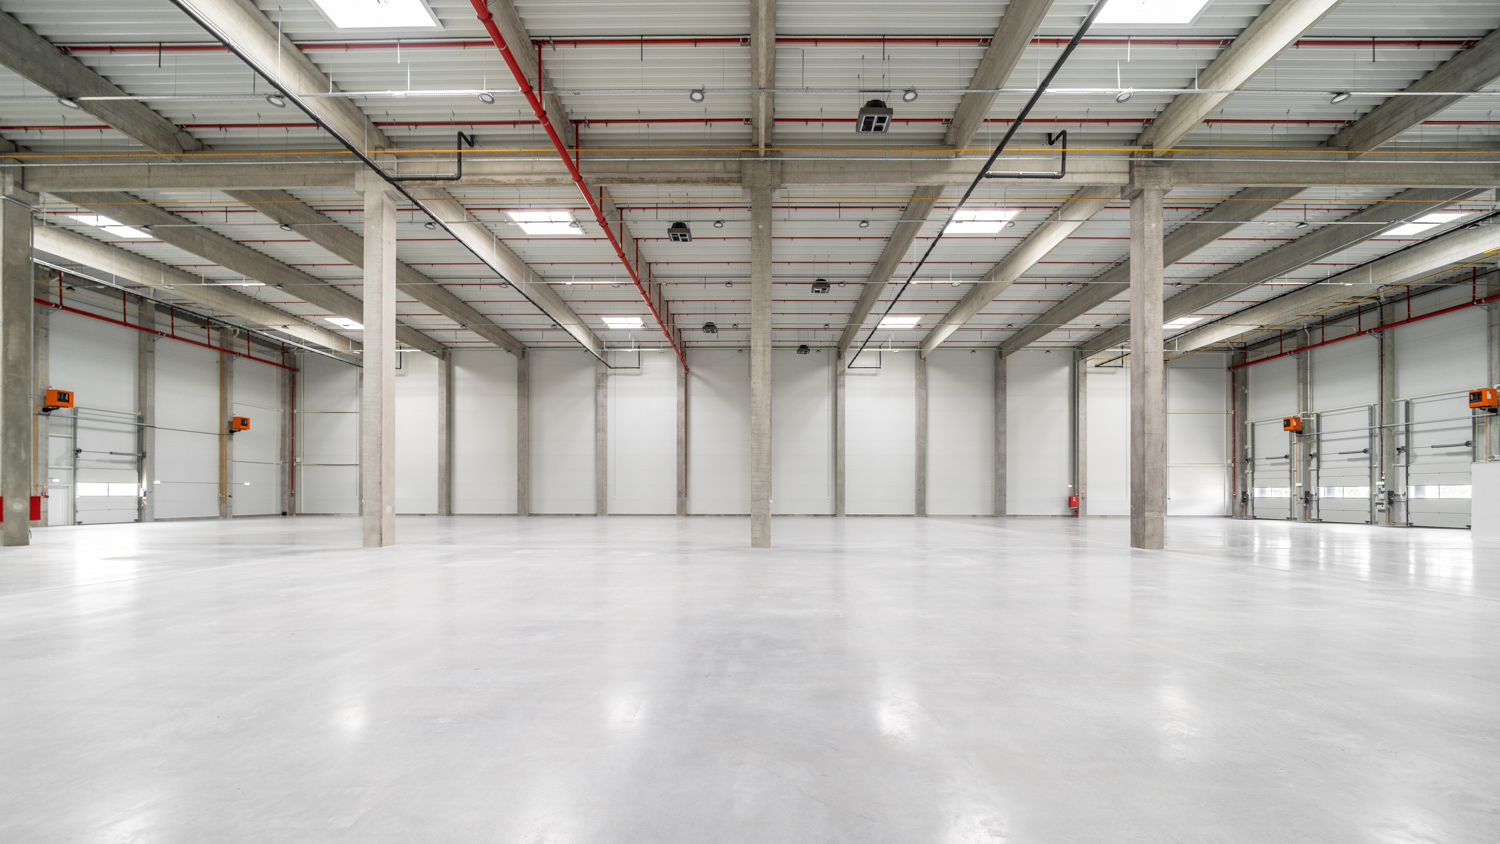 WING has completed its latest industrial property development project, Hall ‘I’ at Airport City Business Park